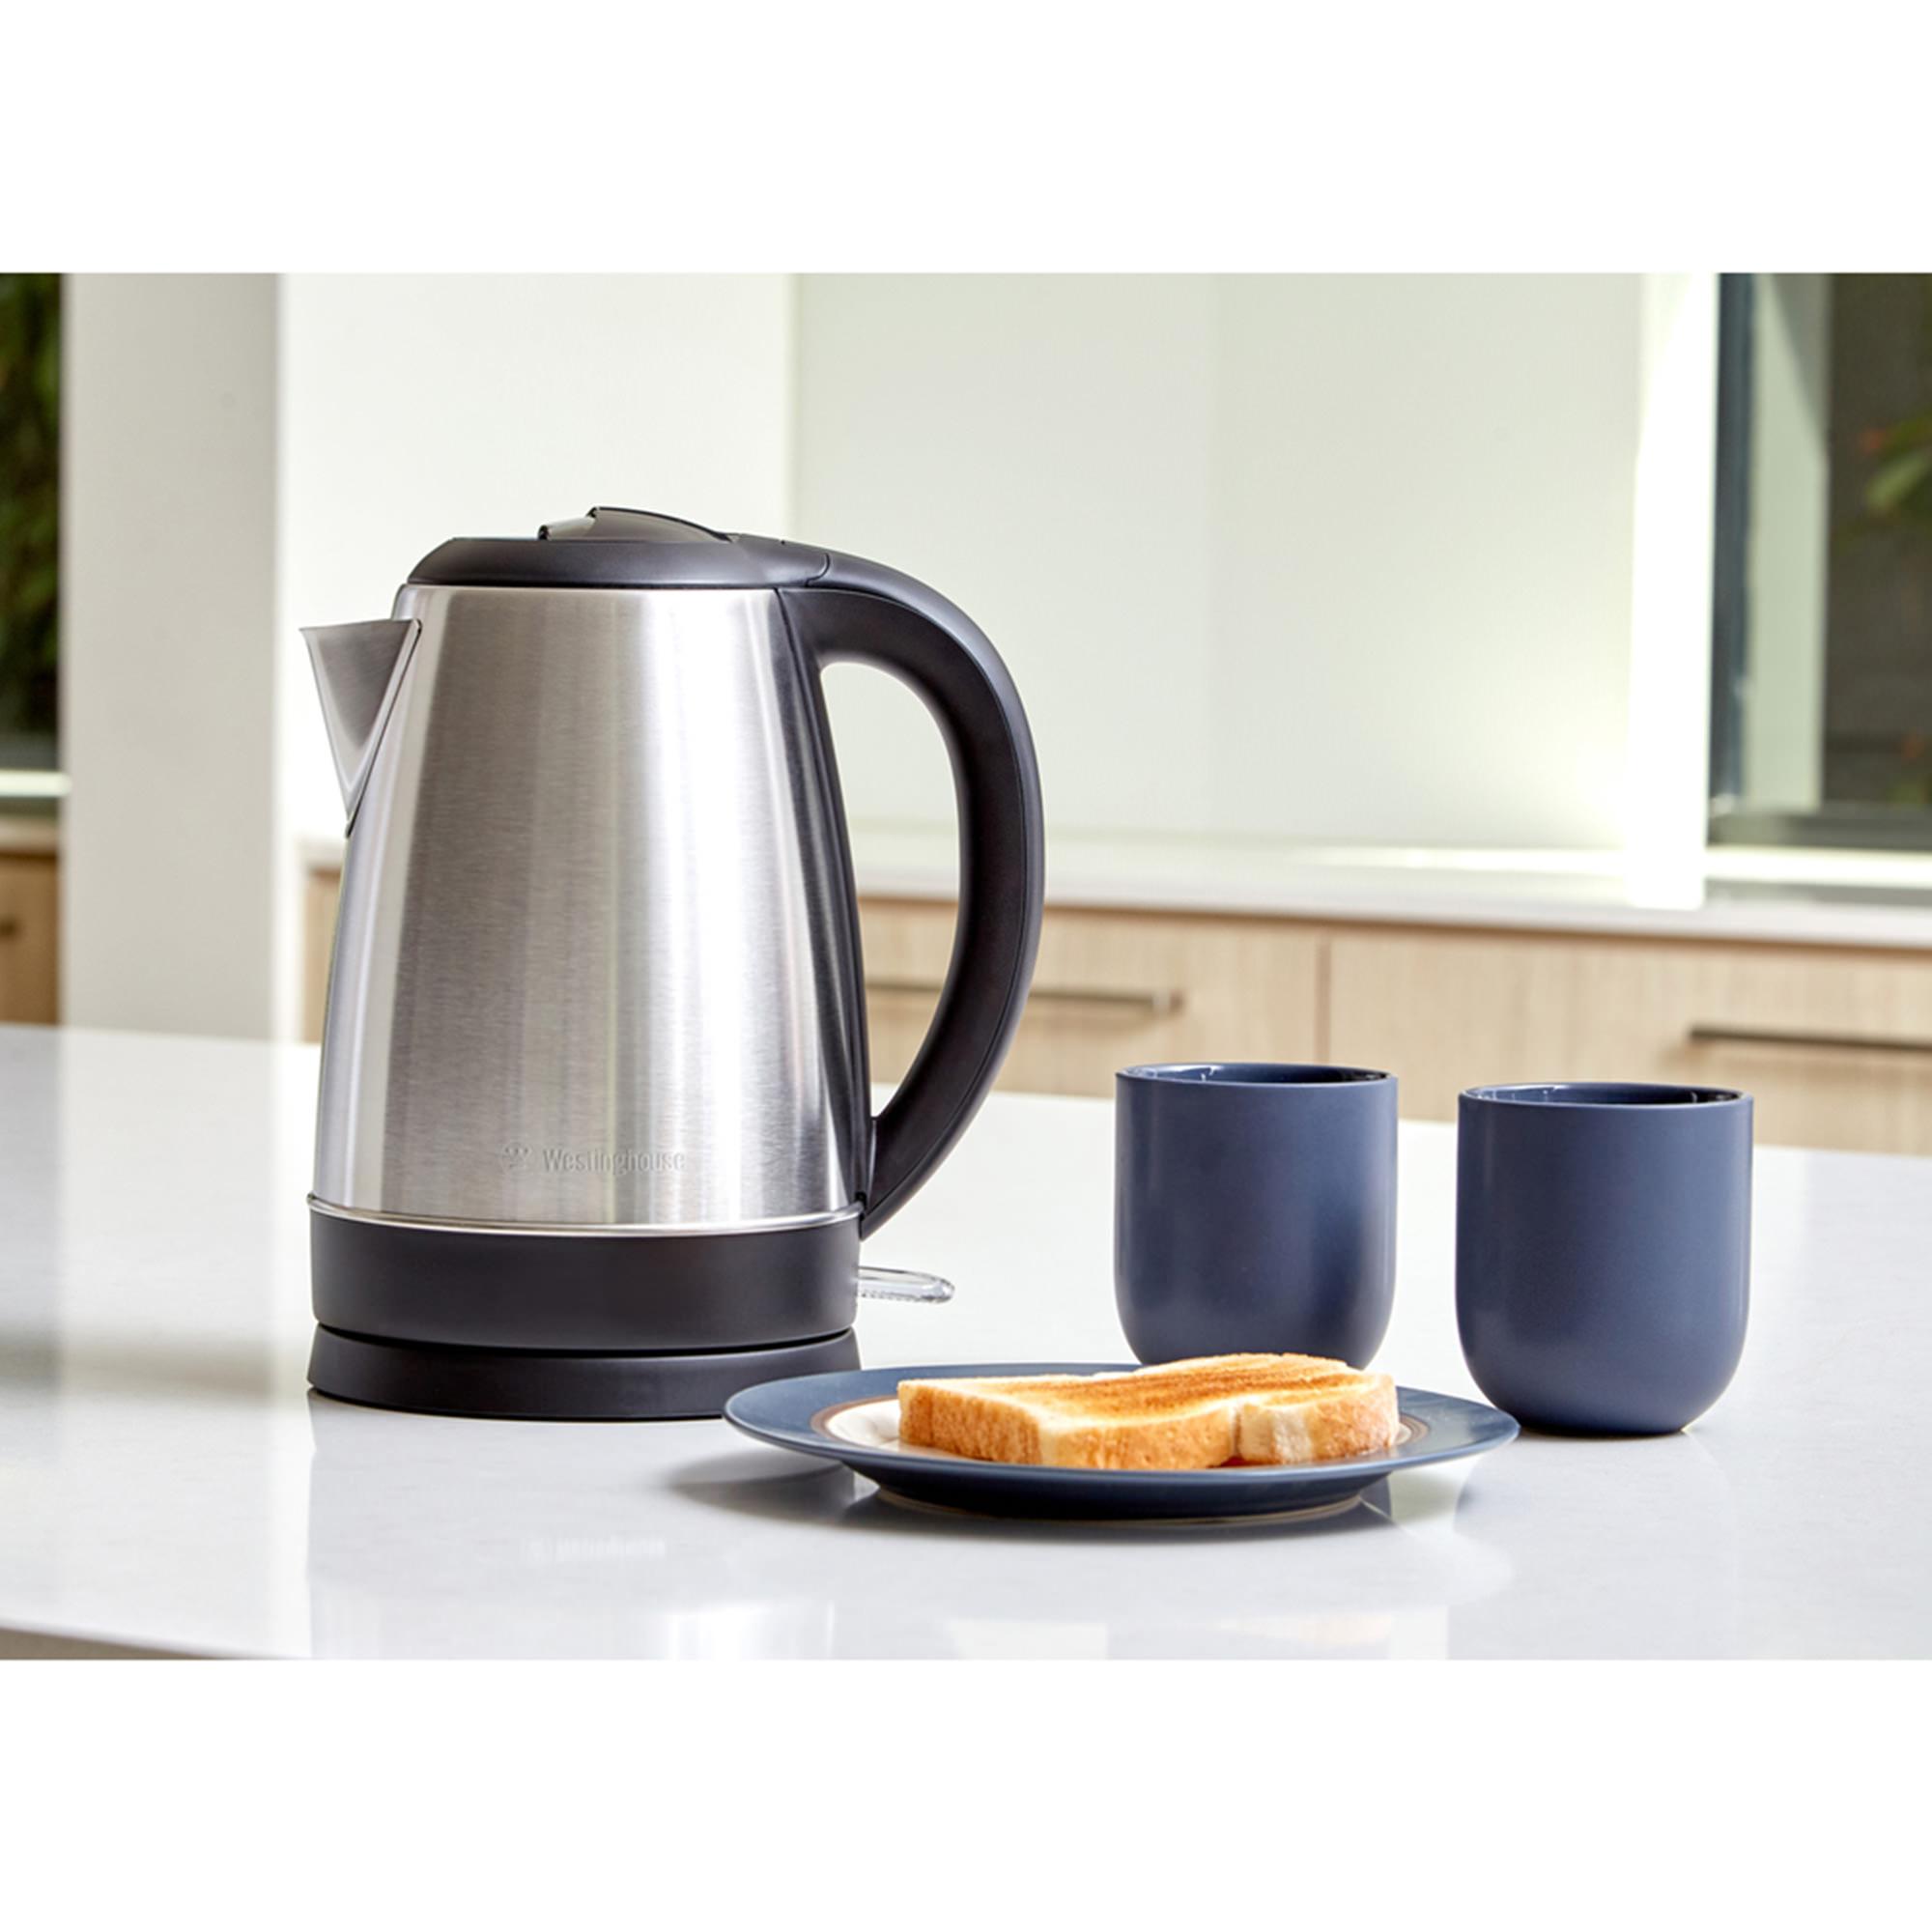 Westinghouse Stainless Steel Electric Kettle 1.7L Image 4